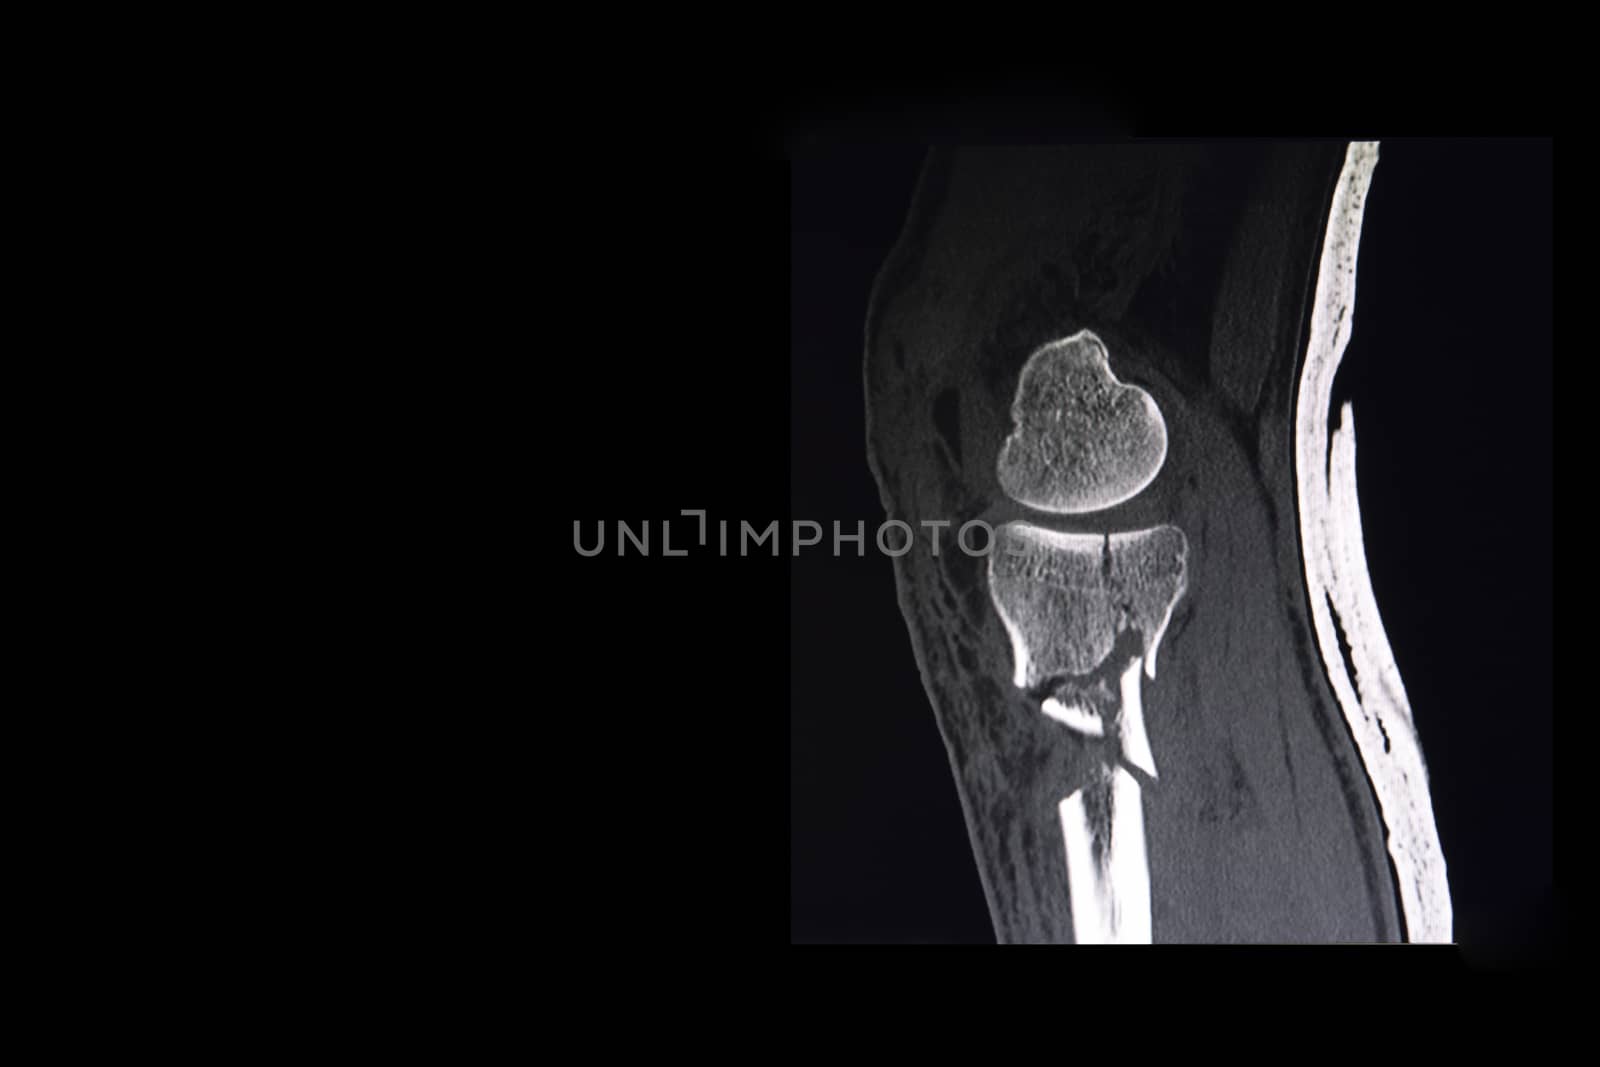 CT scan of a knee of the patient showing comminuted fracture of tibial plateau and proximal tibia.